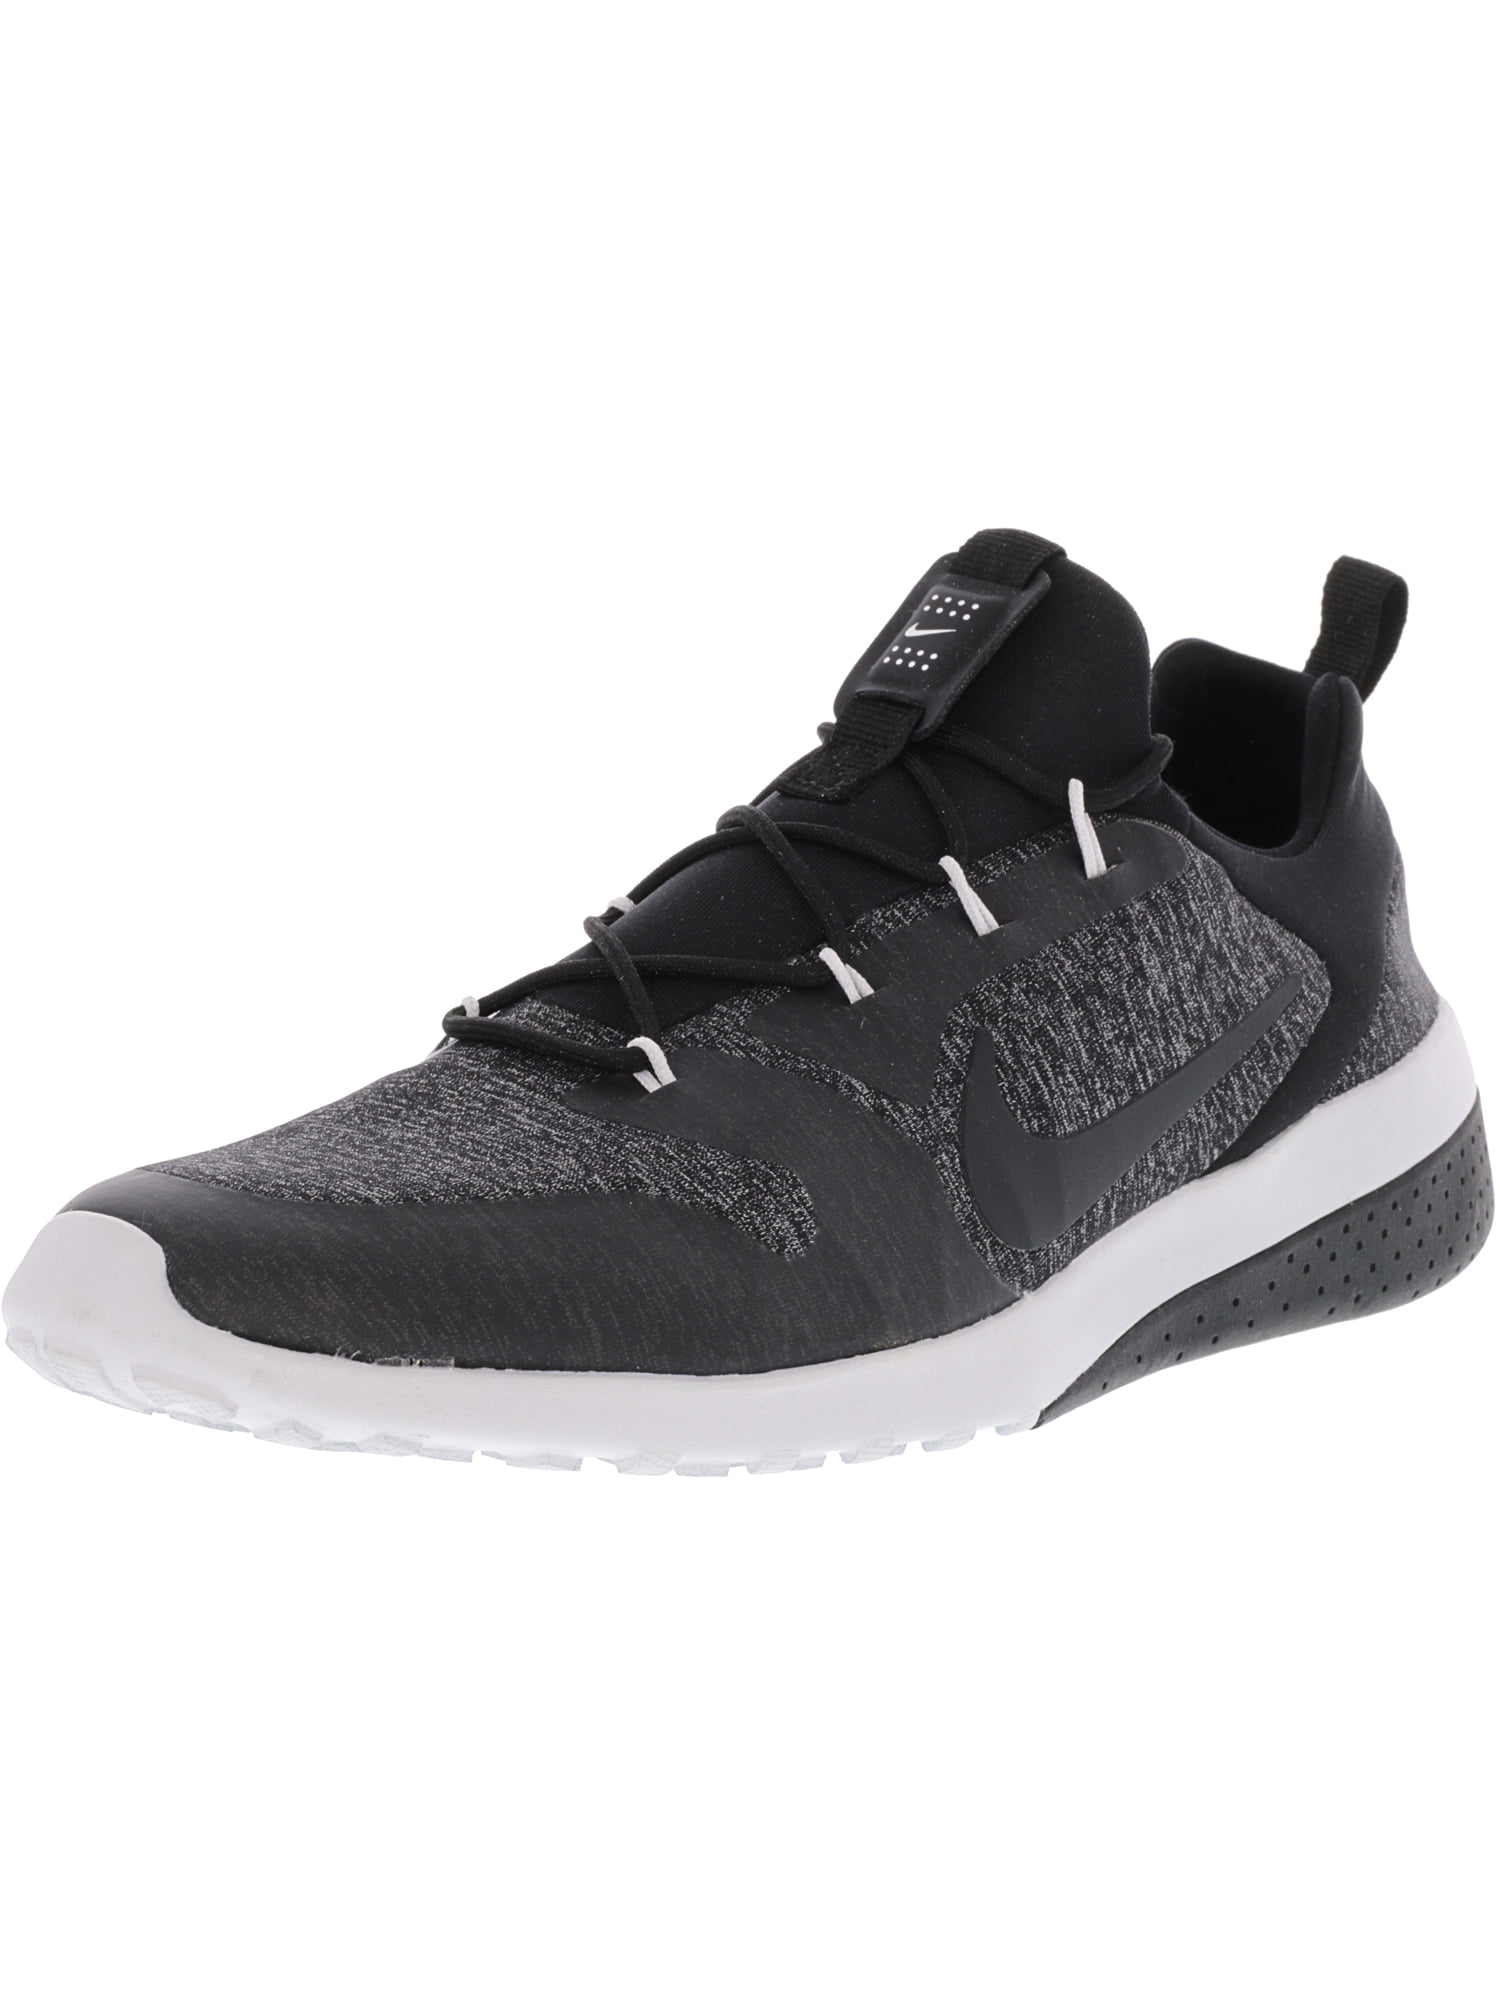 nike ck racer mens trainers